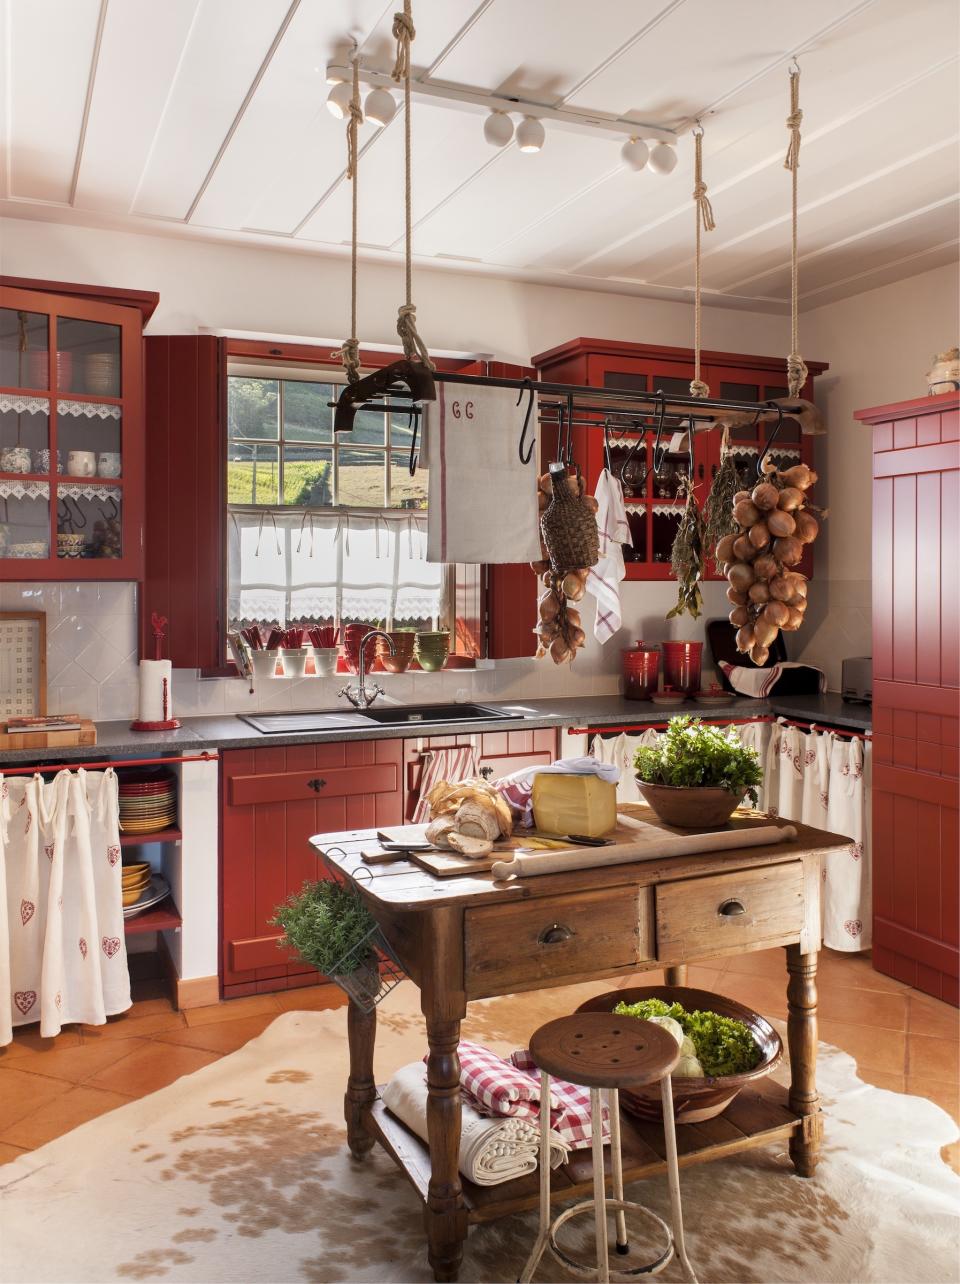 <p> With the gourmet status of Gallic cuisine, it's no surprise that French country kitchens put food front and centre.  </p> <p> 'The tomato red color was the guiding thread of this house and is also present in this kitchen. It's a color that is very typical in traditional kitchens and also recalls antique kitchen cloths and linens,' suggests interior designer Joana Aranha. </p> <p> 'Besides all this, it was in the local markets that we took the inspiration for the organization of the kitchen with hanging onions and aromatic herbs scattered throughout the space. We even designed some shelves slatted underneath to keep the vegetables in plain sight, ensuring that they last longer. This is a place to actually cook – a real and warm country kitchen.' </p>